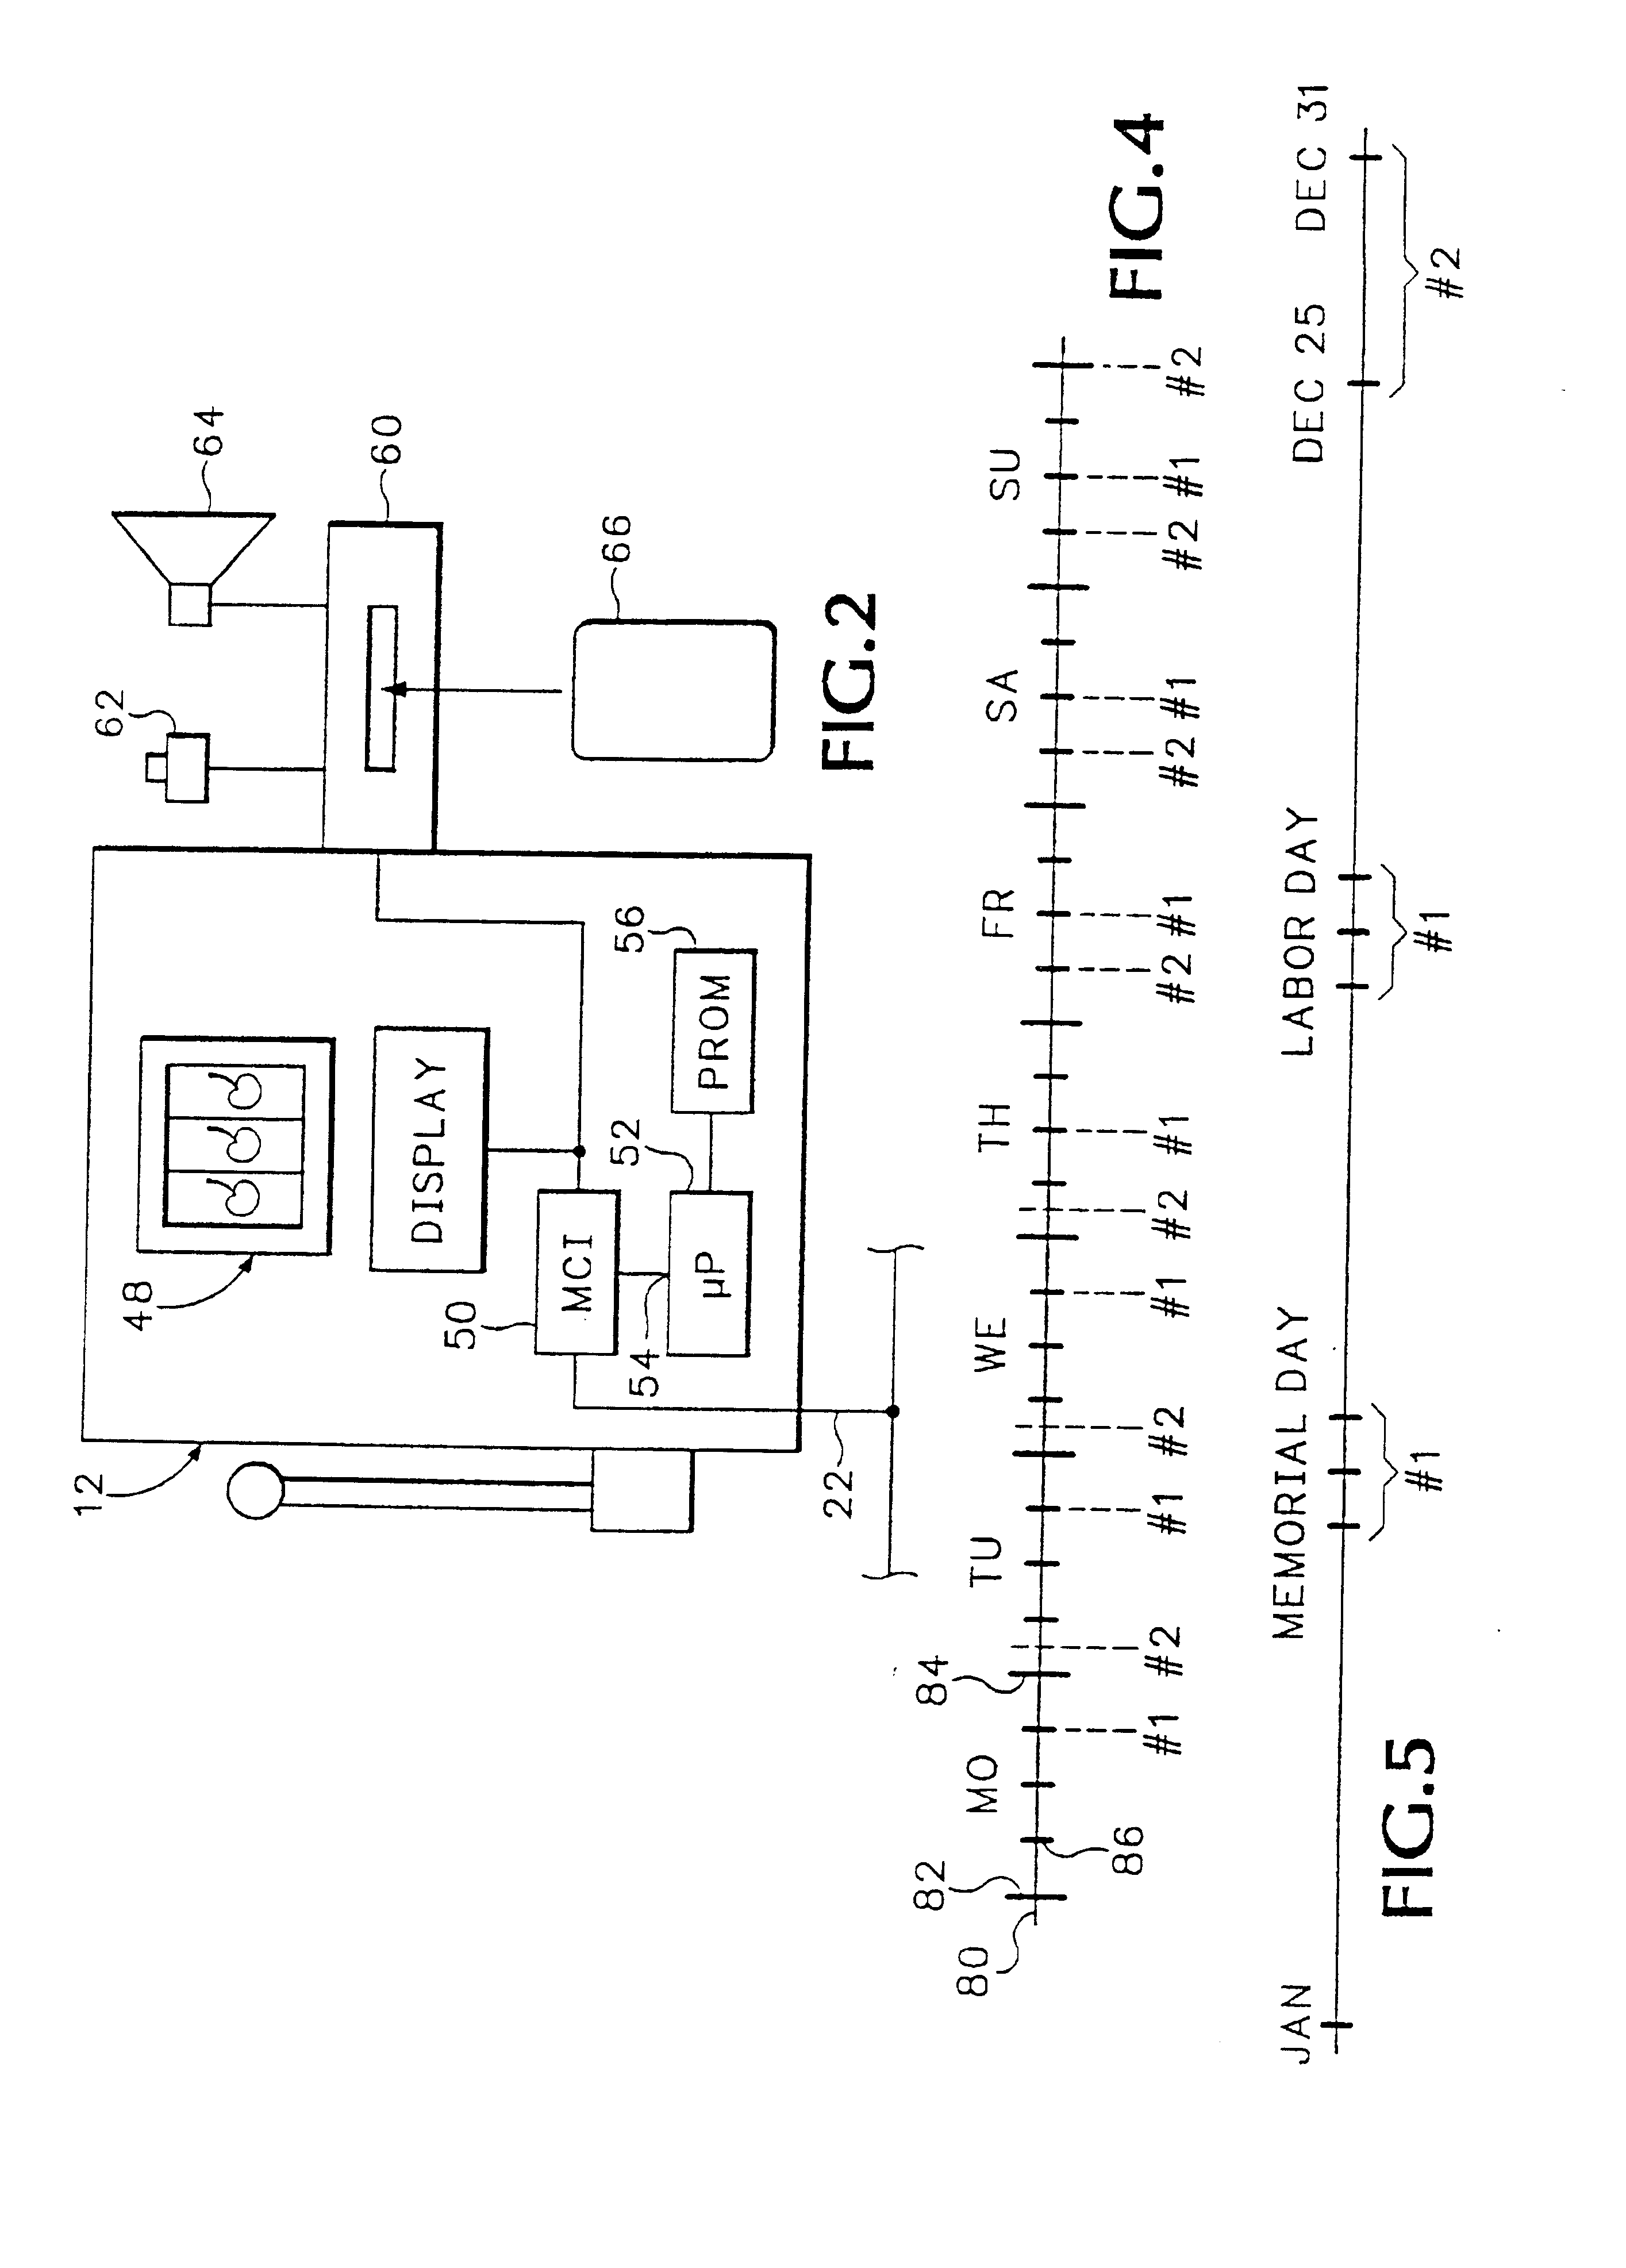 Method and apparatus for controlling the cost of playing an electronic gaming device